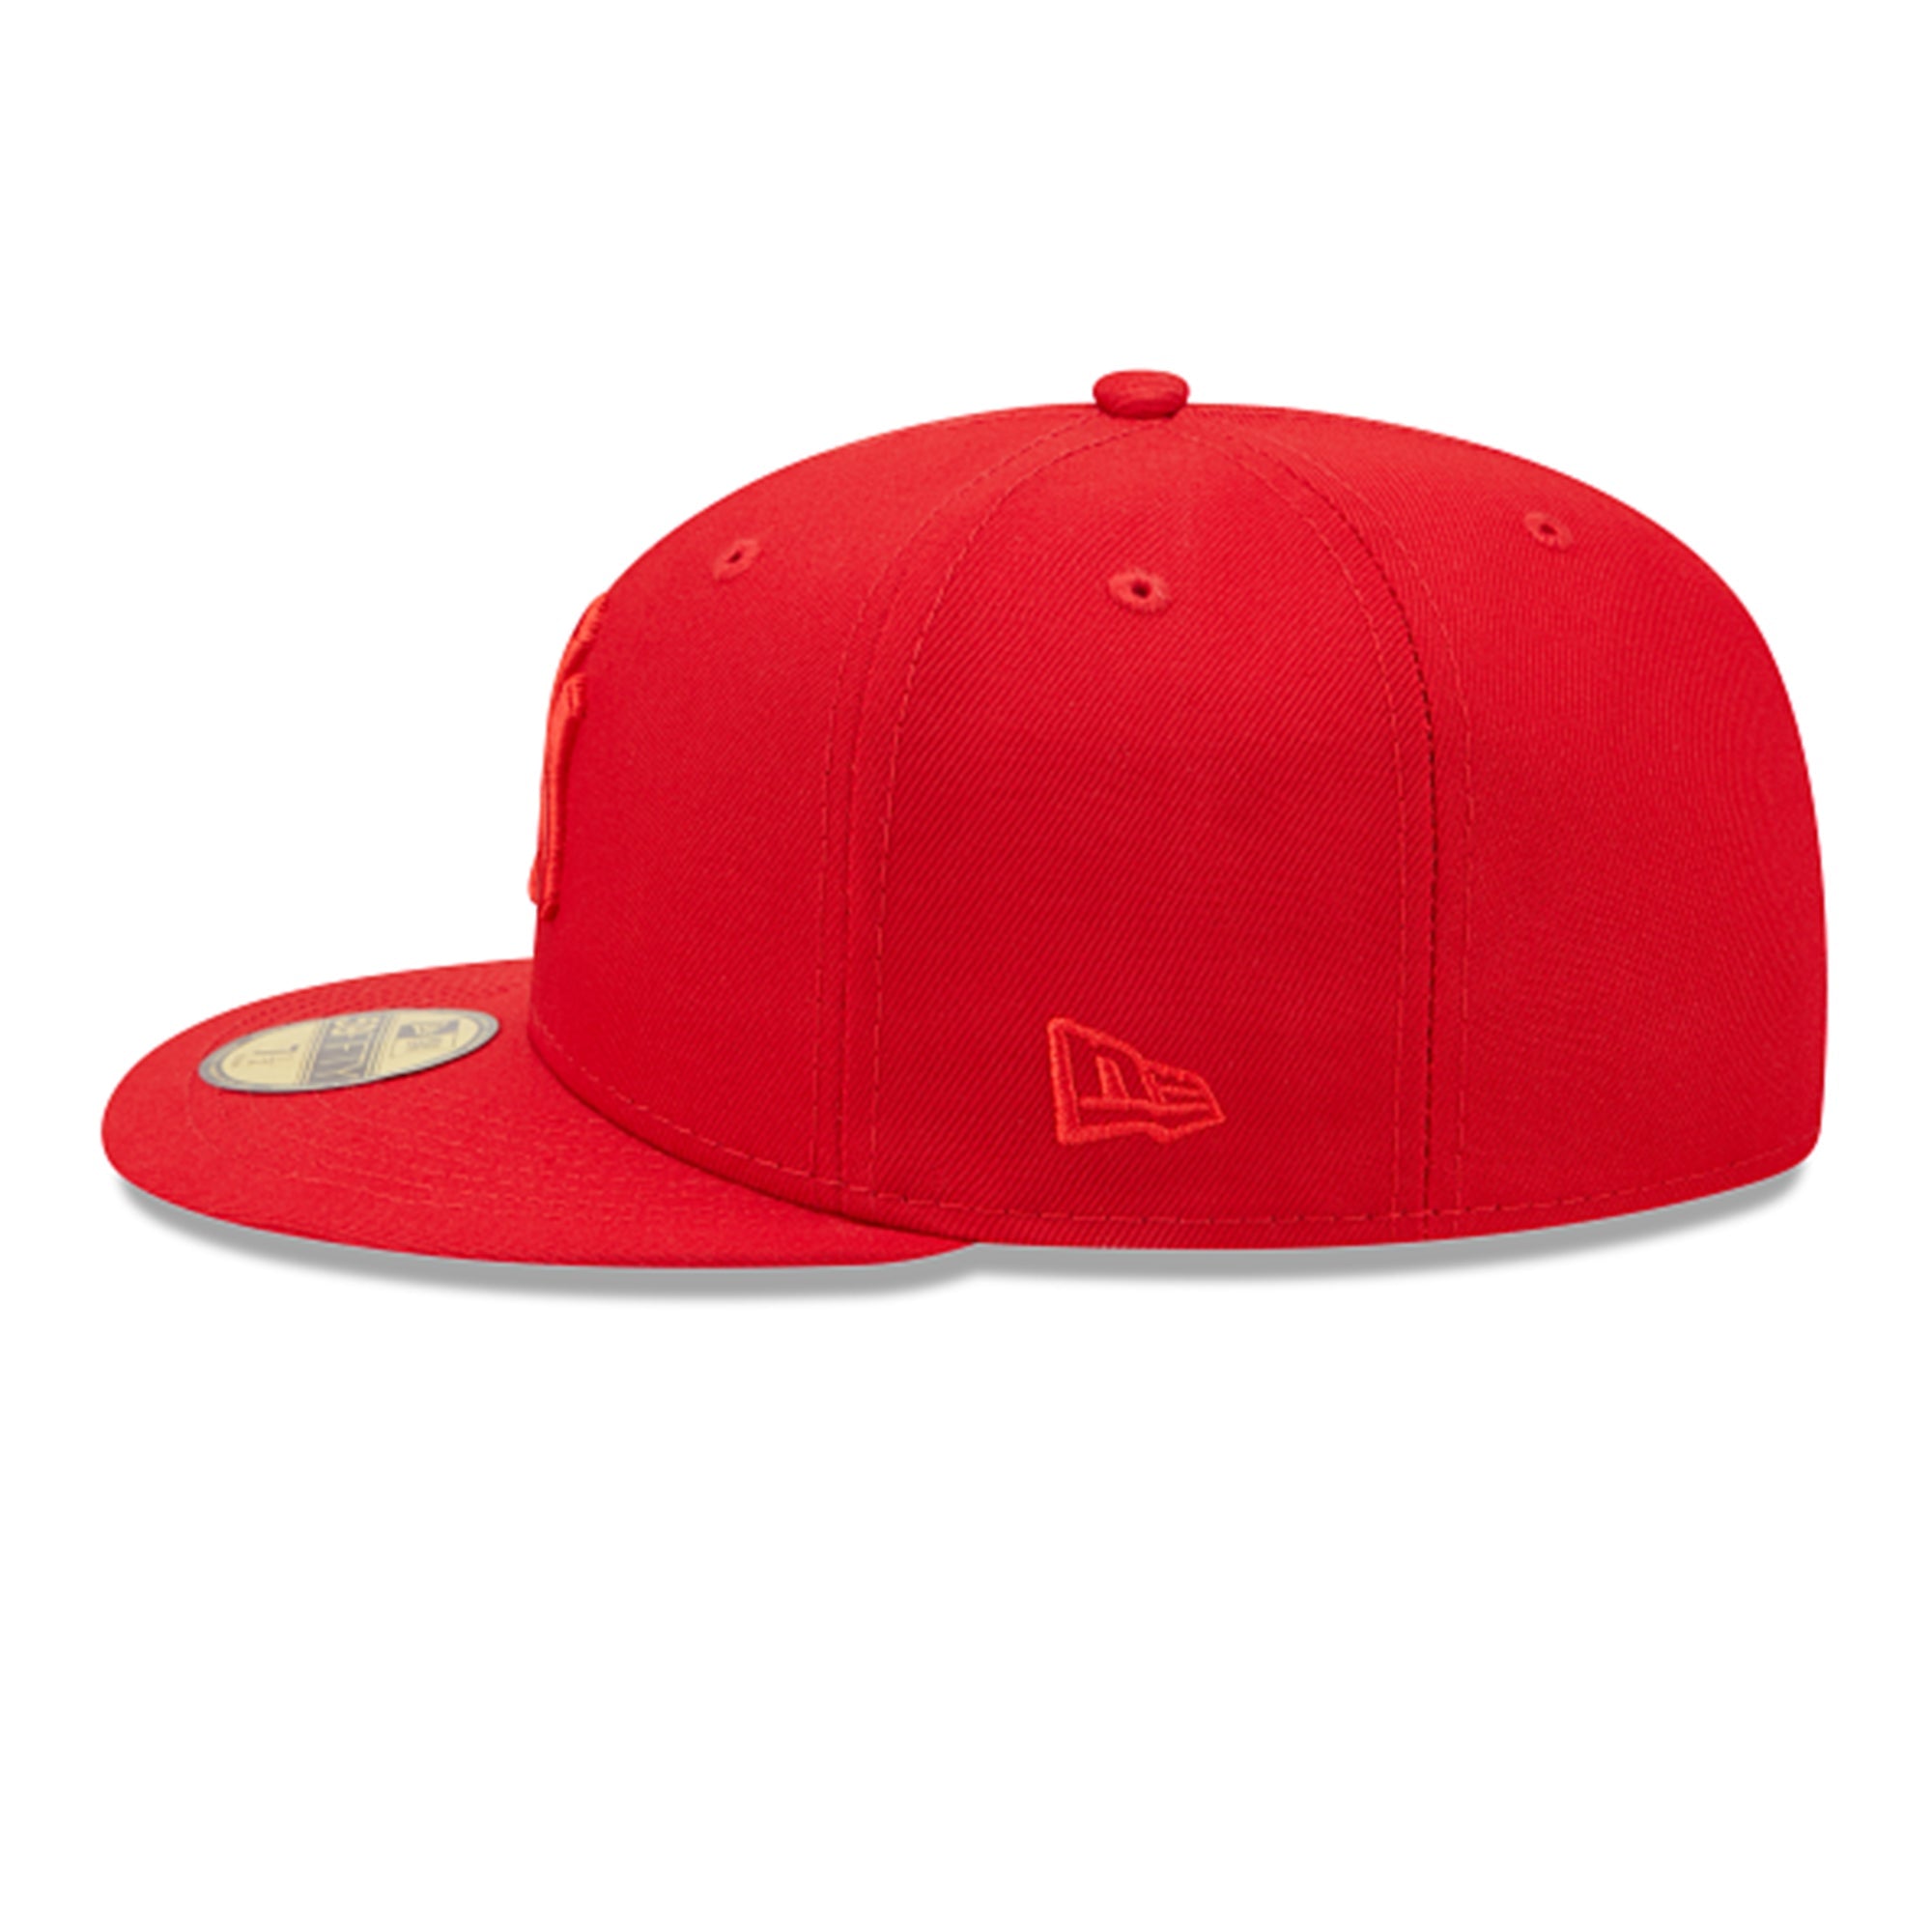 New Era New York Yankees Fitted Hat (Red)3